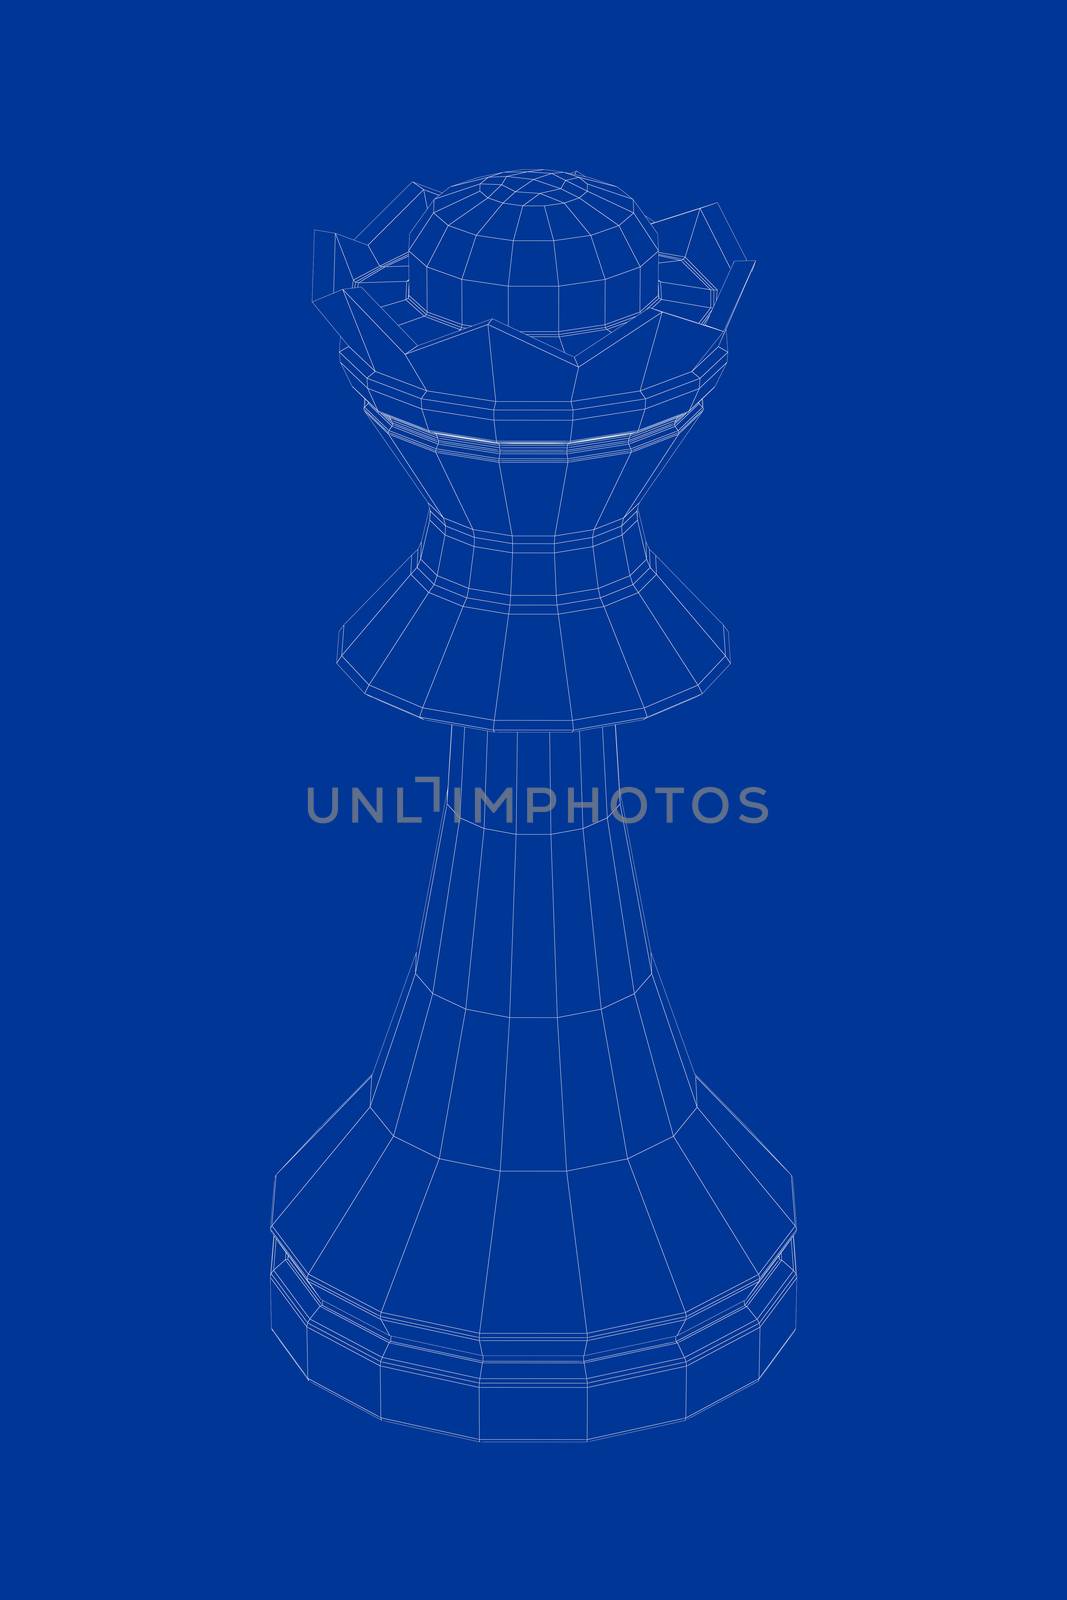 3d wire-frame model of queen chess piece